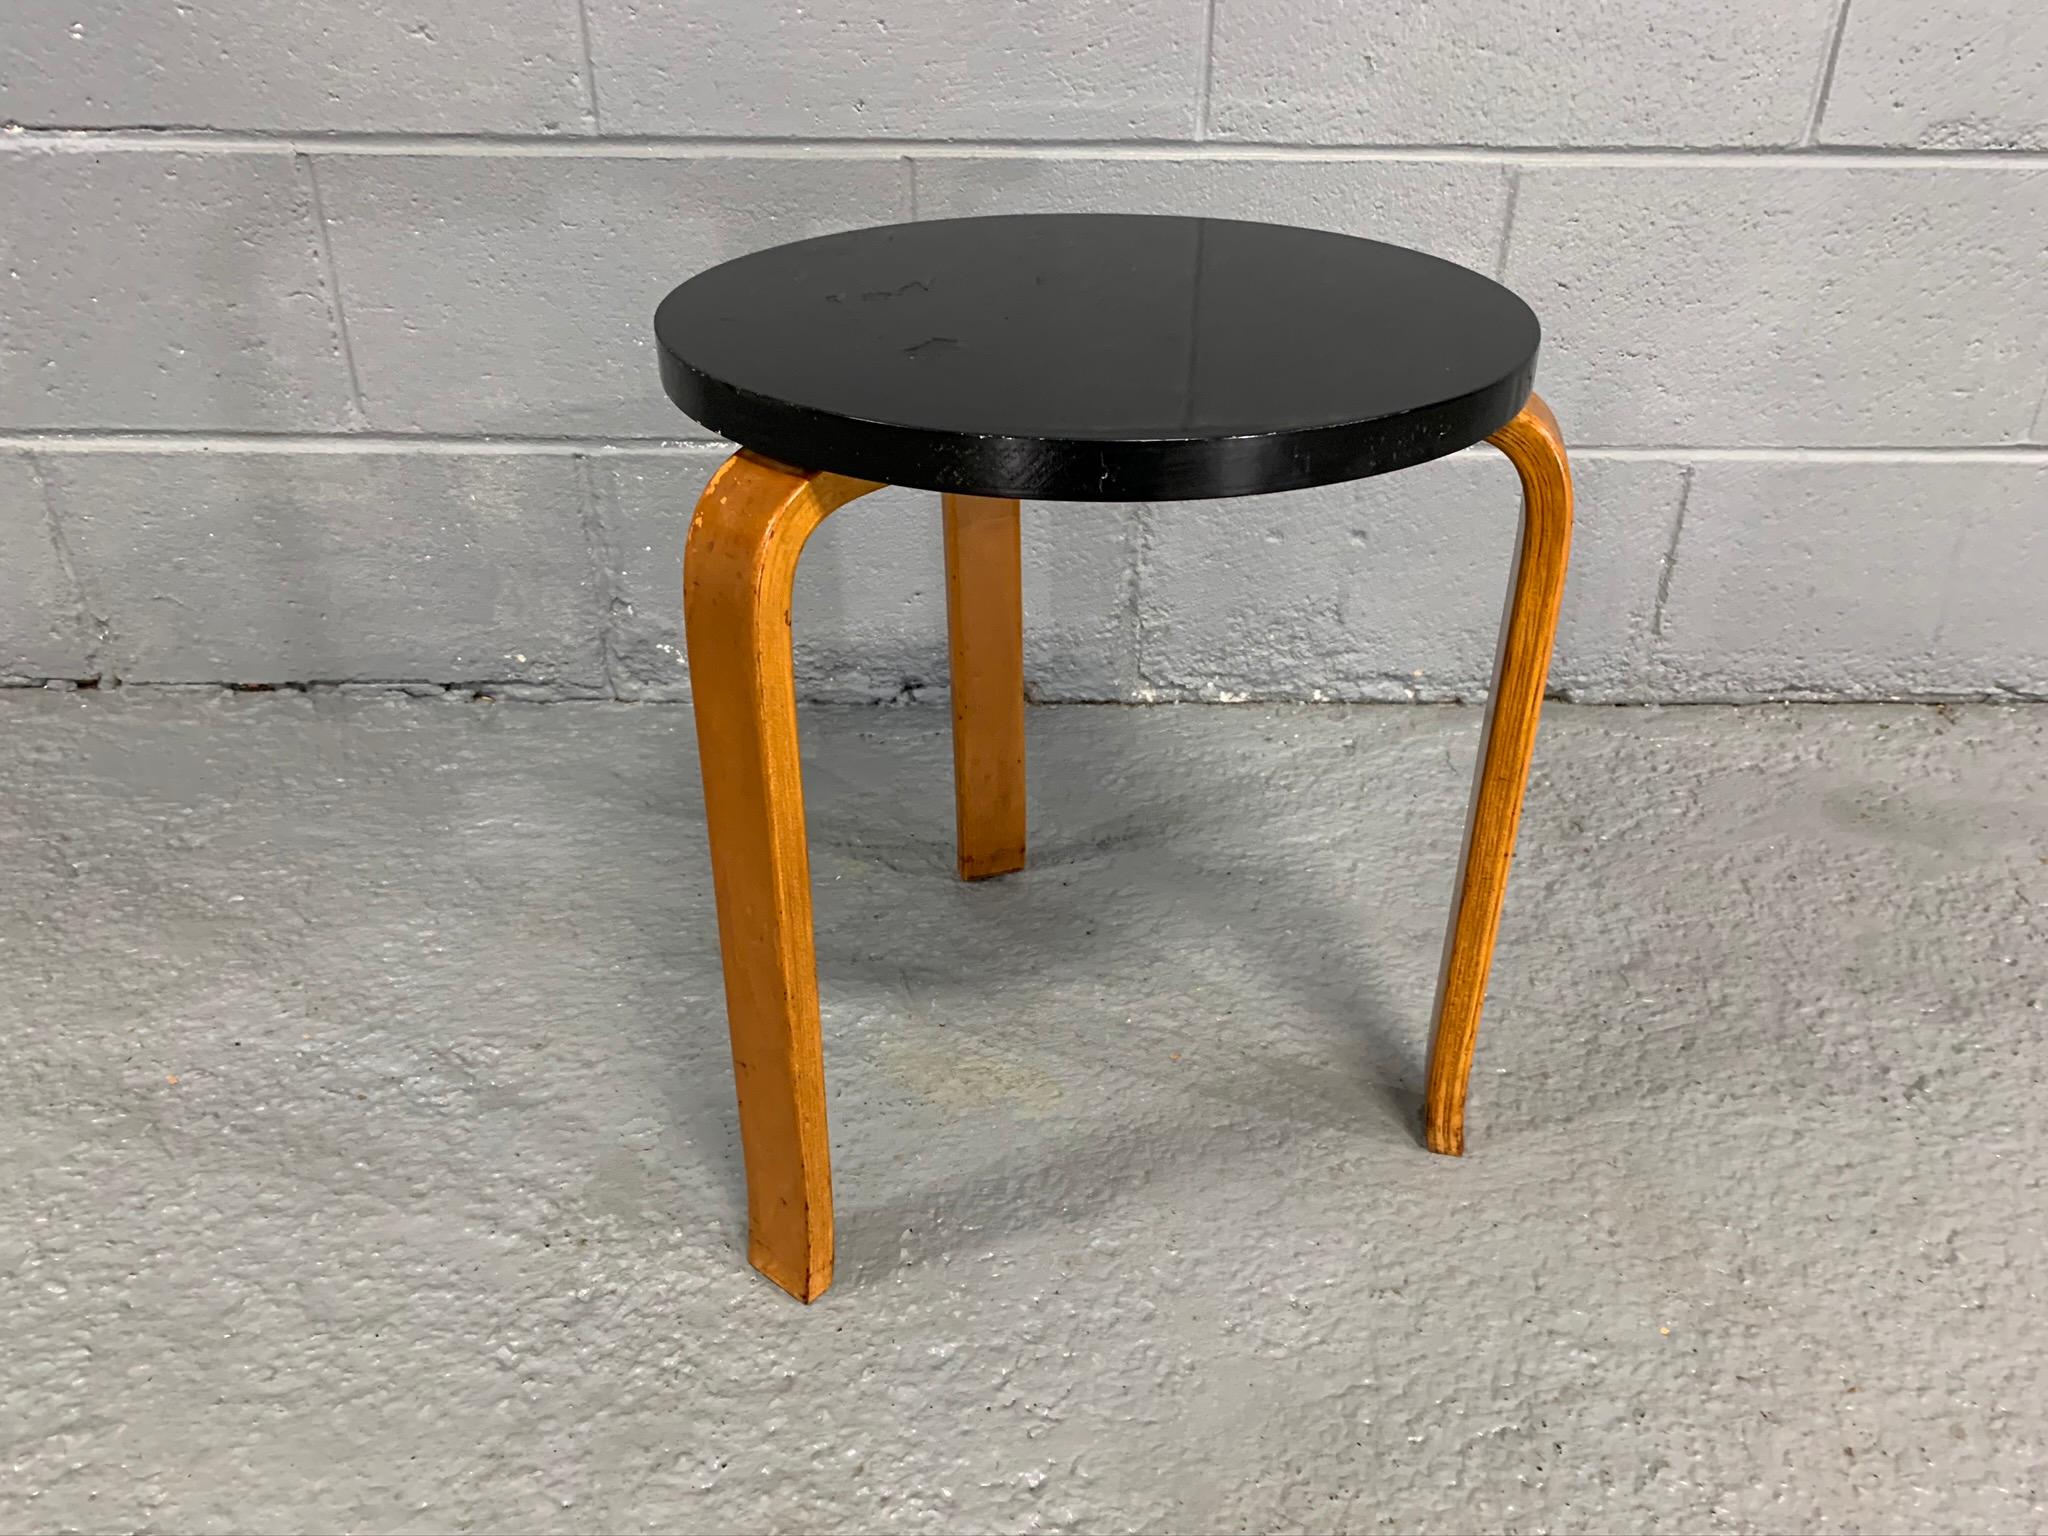 Alvar Aalto stool manufactured by Artek, originally designed in 1933. Crafted in Laminated Birch. Retails warm, rich, original patina and based upon its patina and provenance appears to be an early example of Alvar Aalto's work.

Alvar Aalto